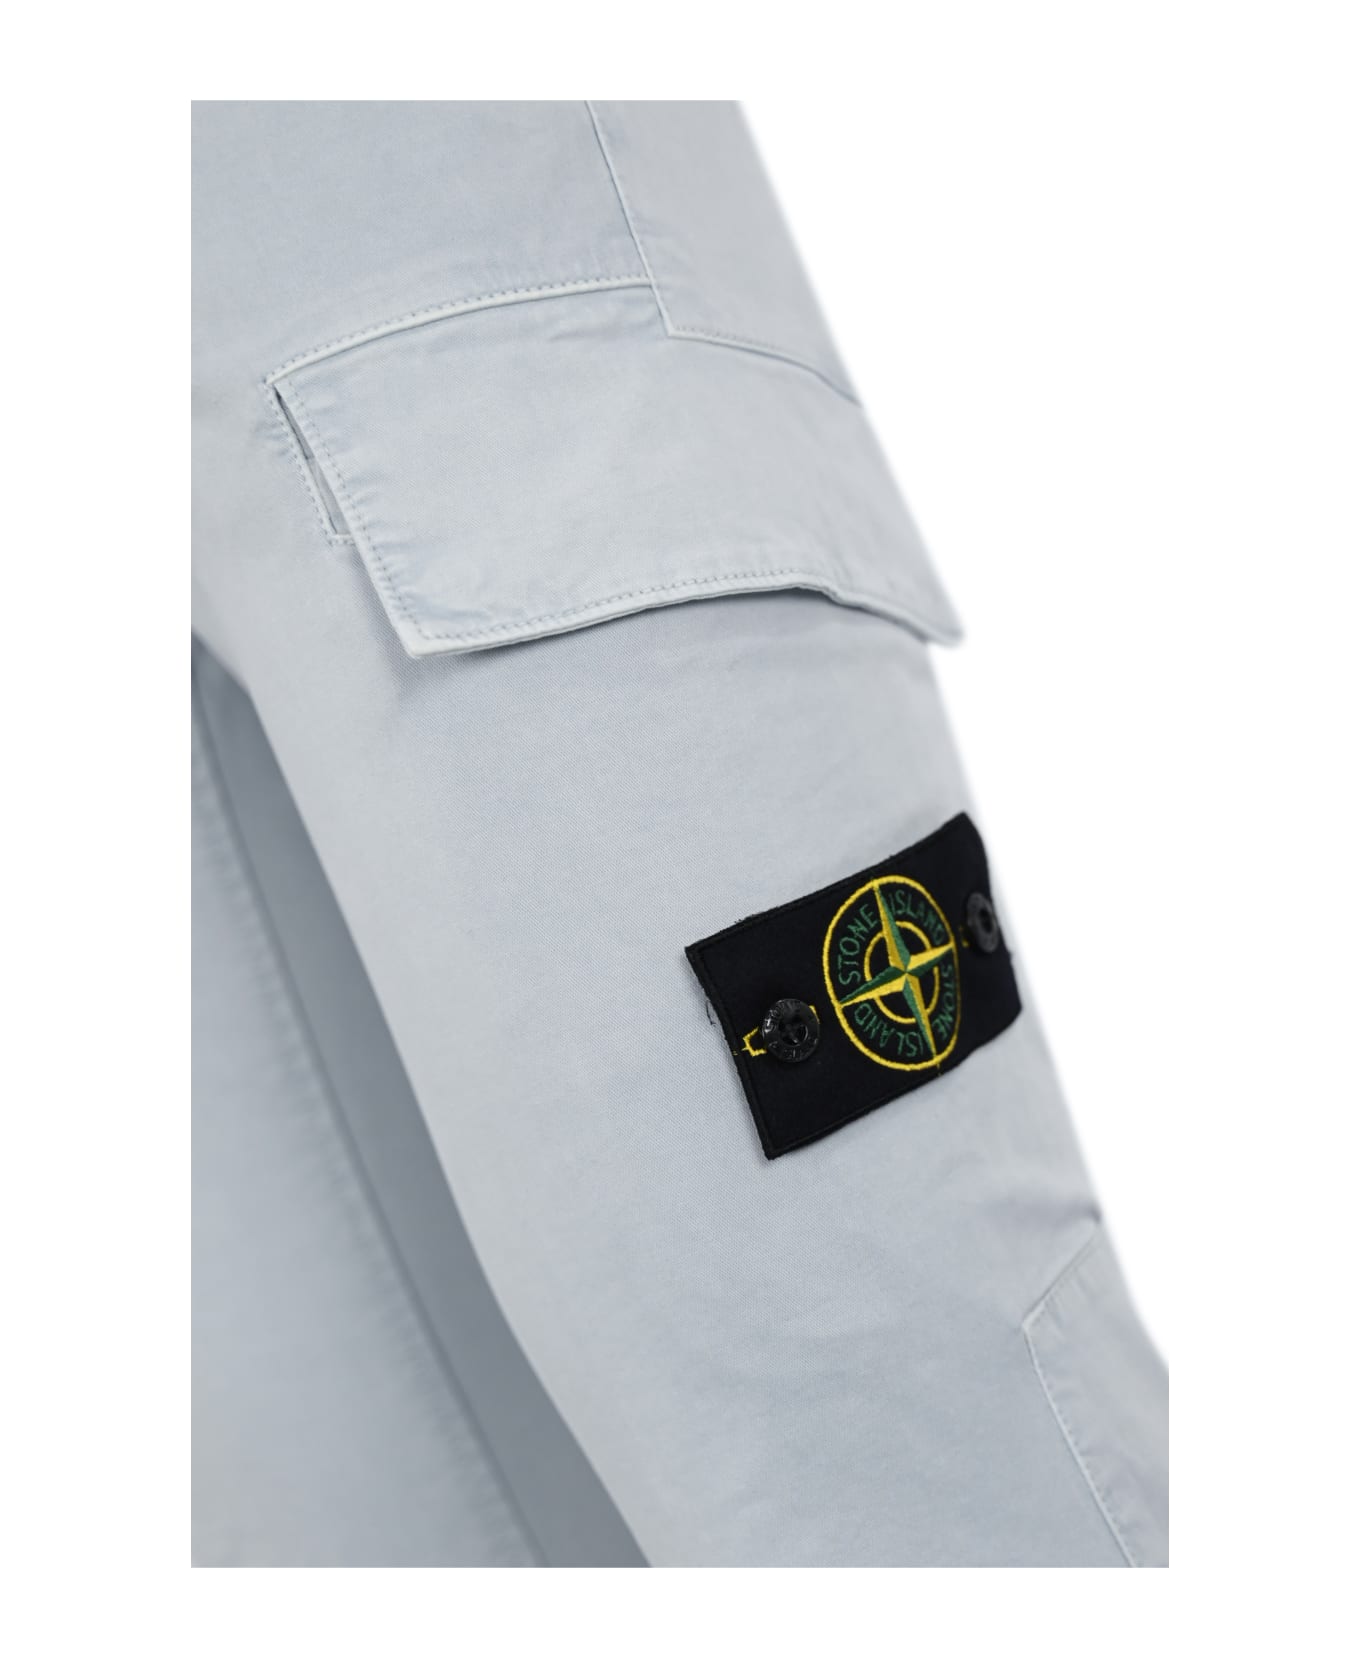 Stone Island Cargo Trousers 30604 Old Treatment - Sky blue ボトムス